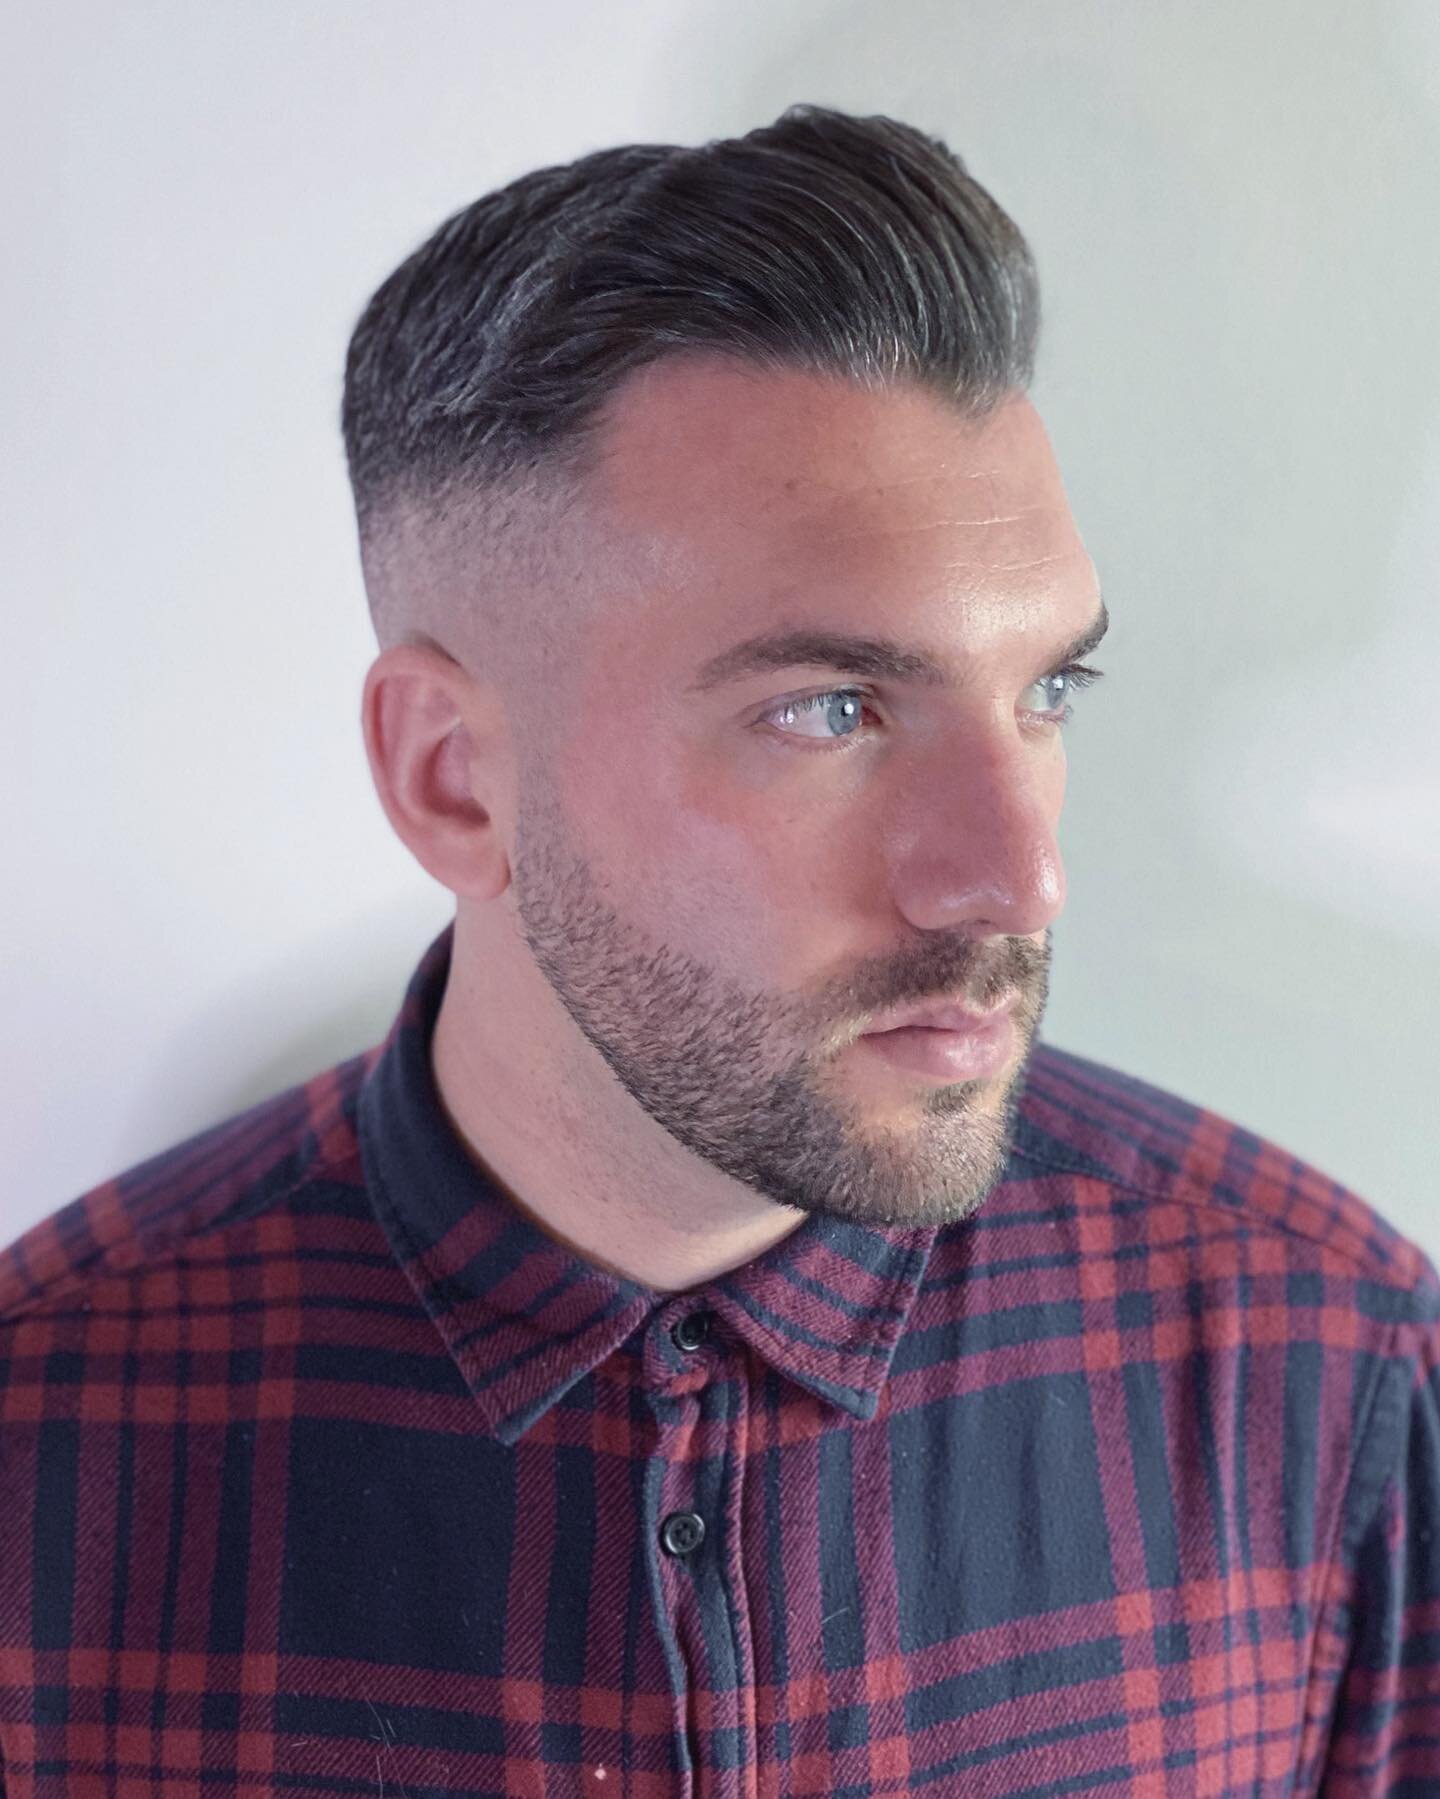 Here&rsquo;s a skin fade on @carlbrownhair here @itsthehairstudio ✂️

Thanks for looking!